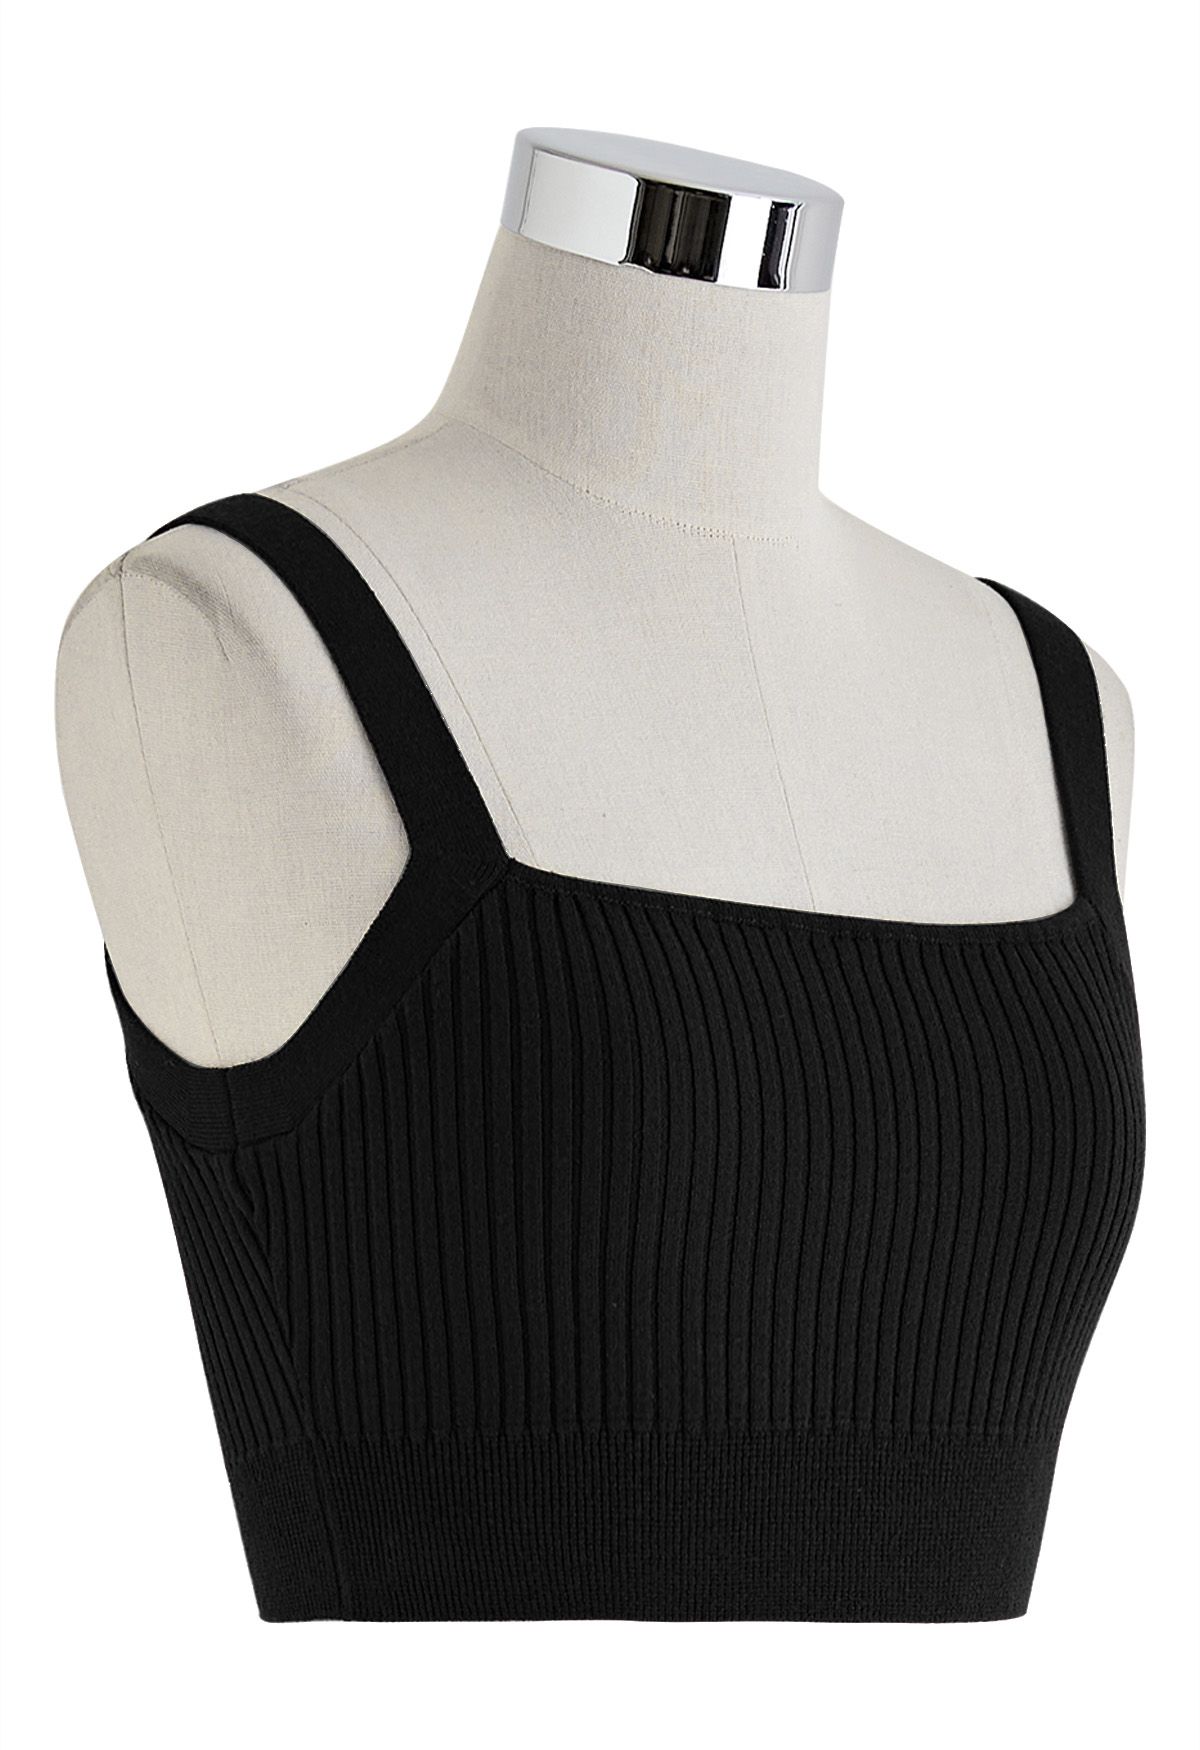 Ultra-Soft Ribbed Cami Knit Cropped Top in Black